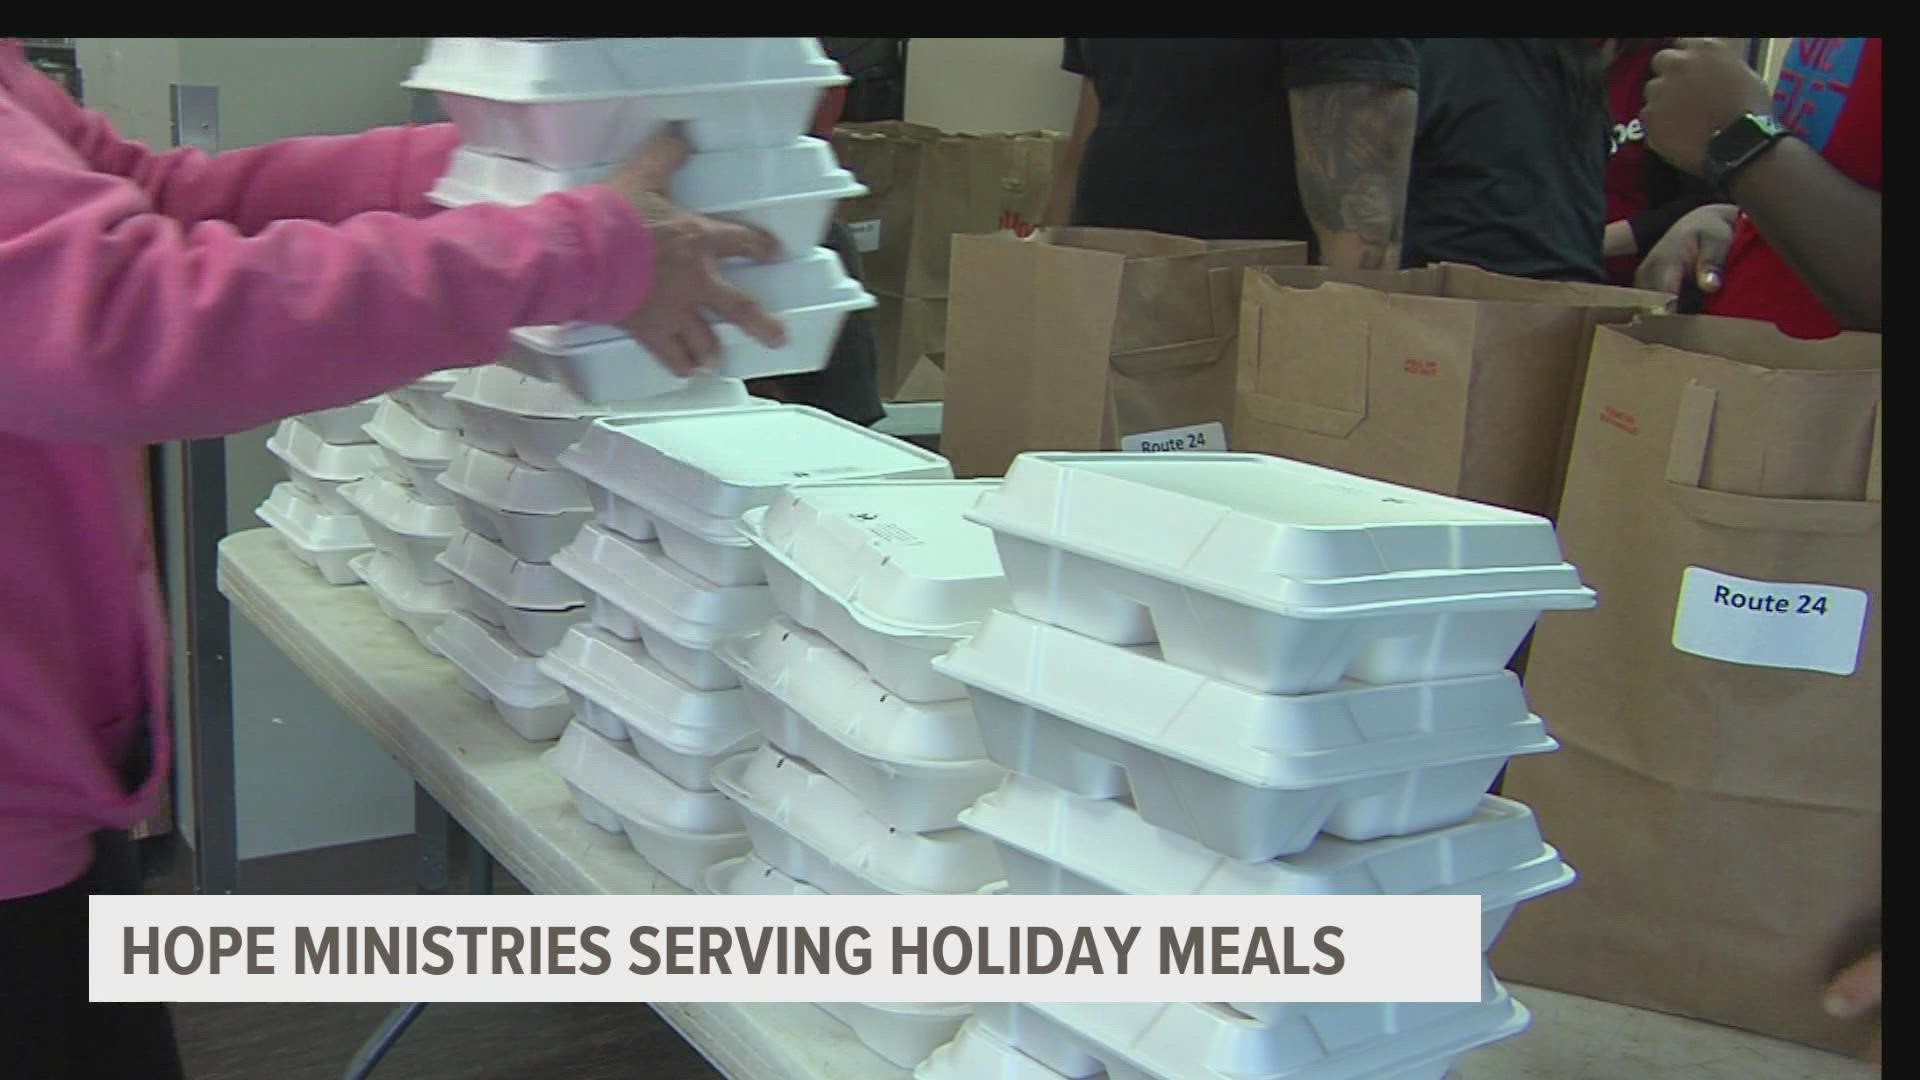 Organizers say they plan to deliver around 2,300 meals to people around the metro. If you want to volunteer in the future, visit hopeiowa.org.